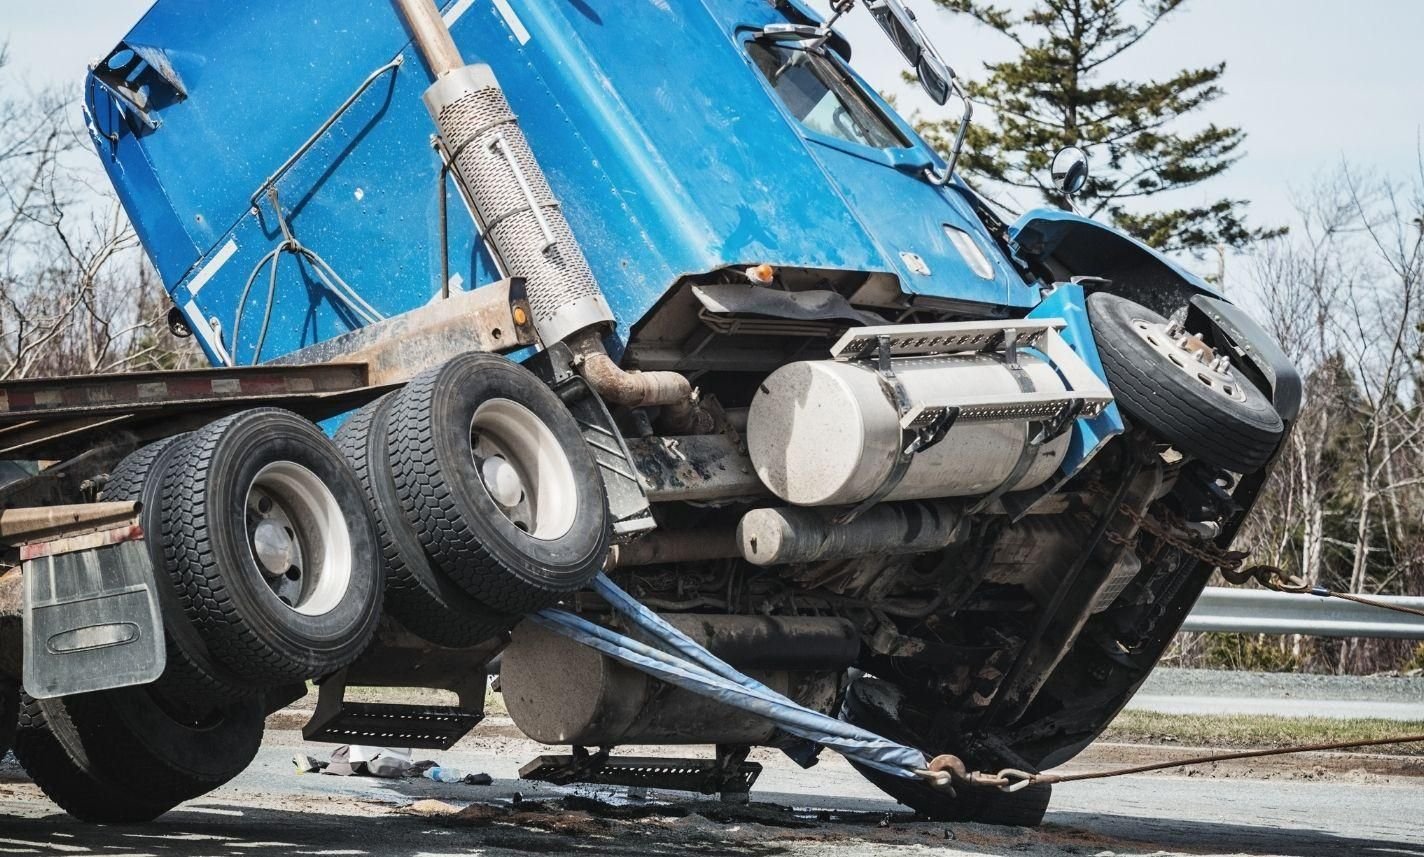 de-soto-commercial-truck-accident-injury-lawyer